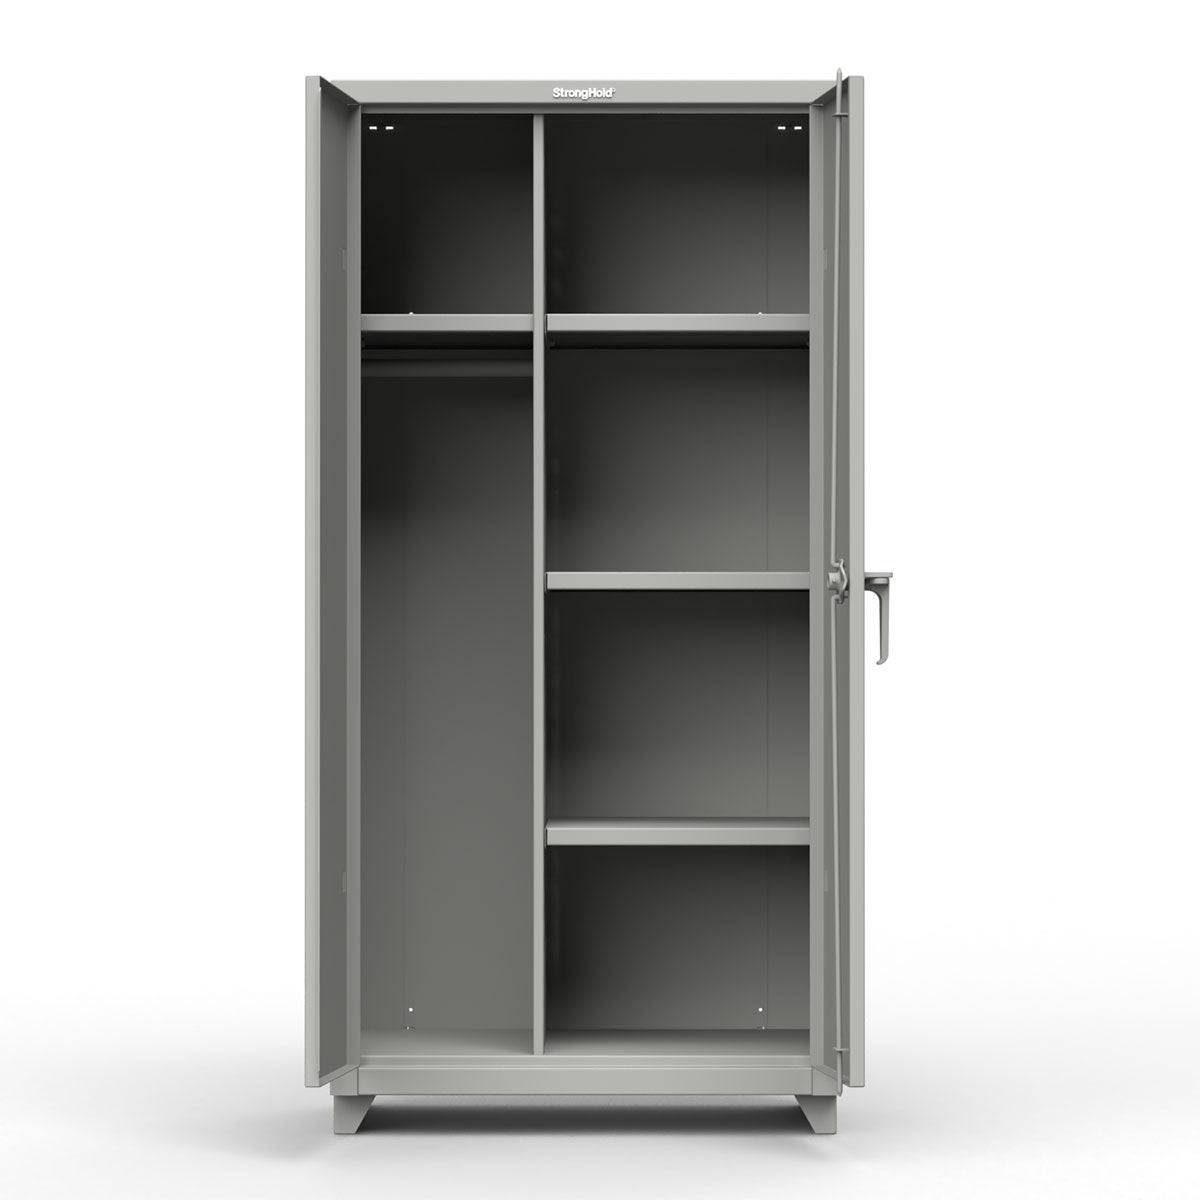 Extra Heavy Duty 14 GA Uniform Cabinet with 4 Shelves - 36 In. W x 24 In. D x 75 In. H - Strong Hold